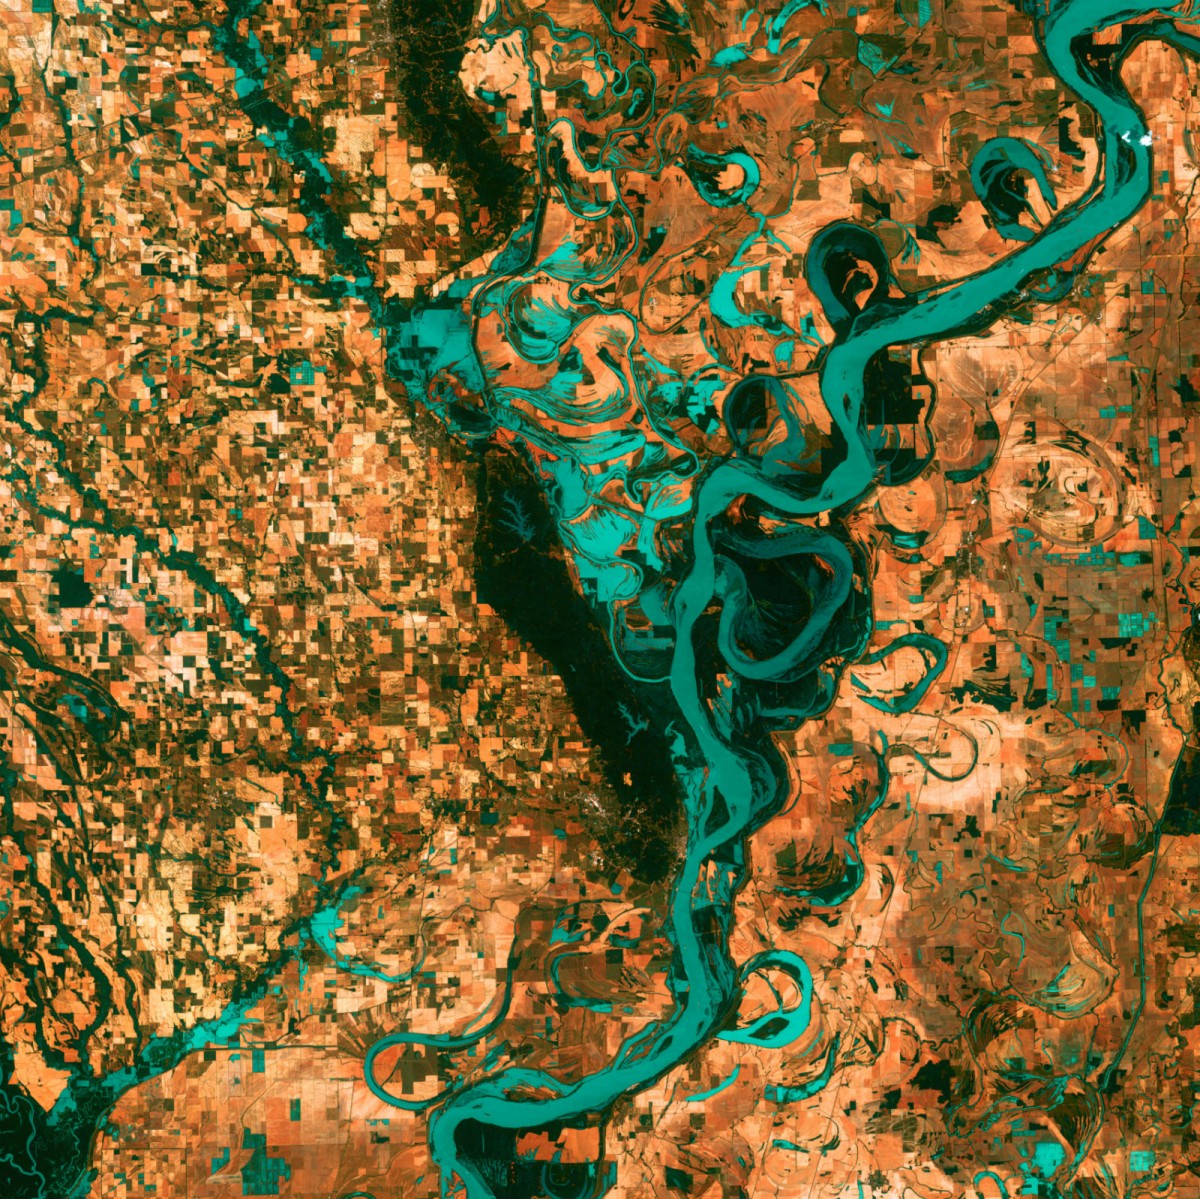 Satellite photo looking down on a blue river curving its way across a tan landscape segmented into squares and rectangles.